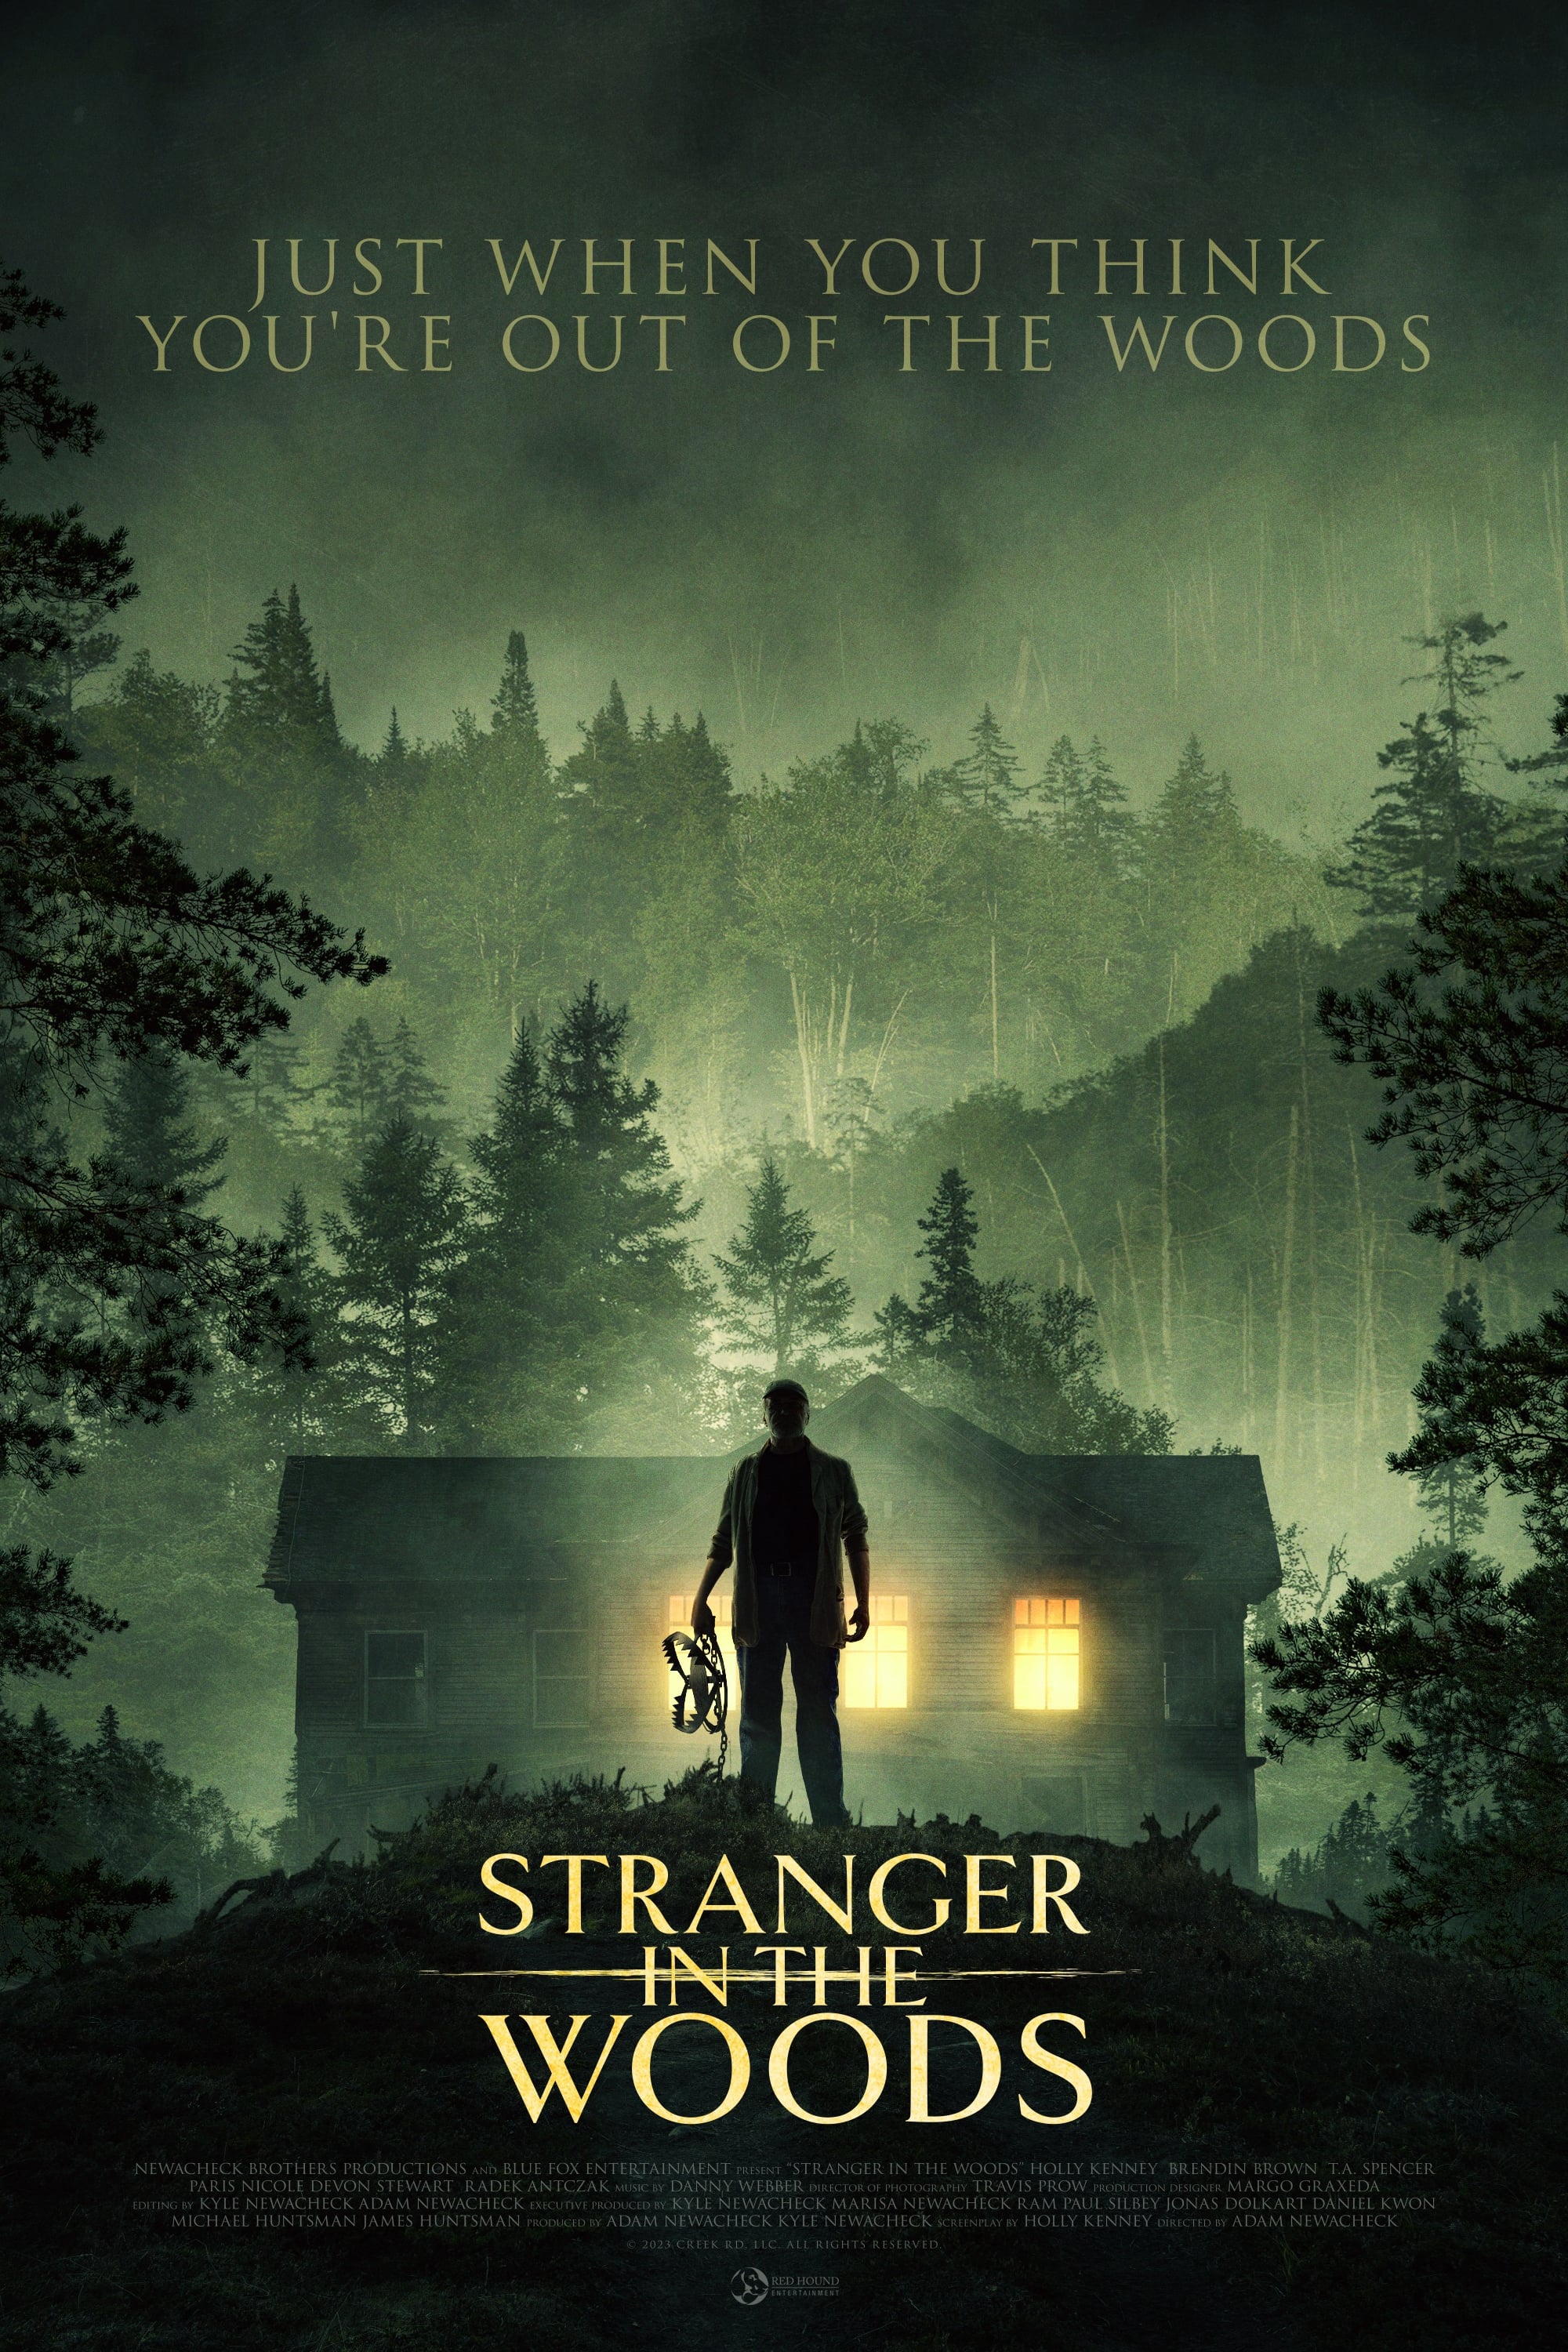 Poster for the movie "Stranger in the Woods"